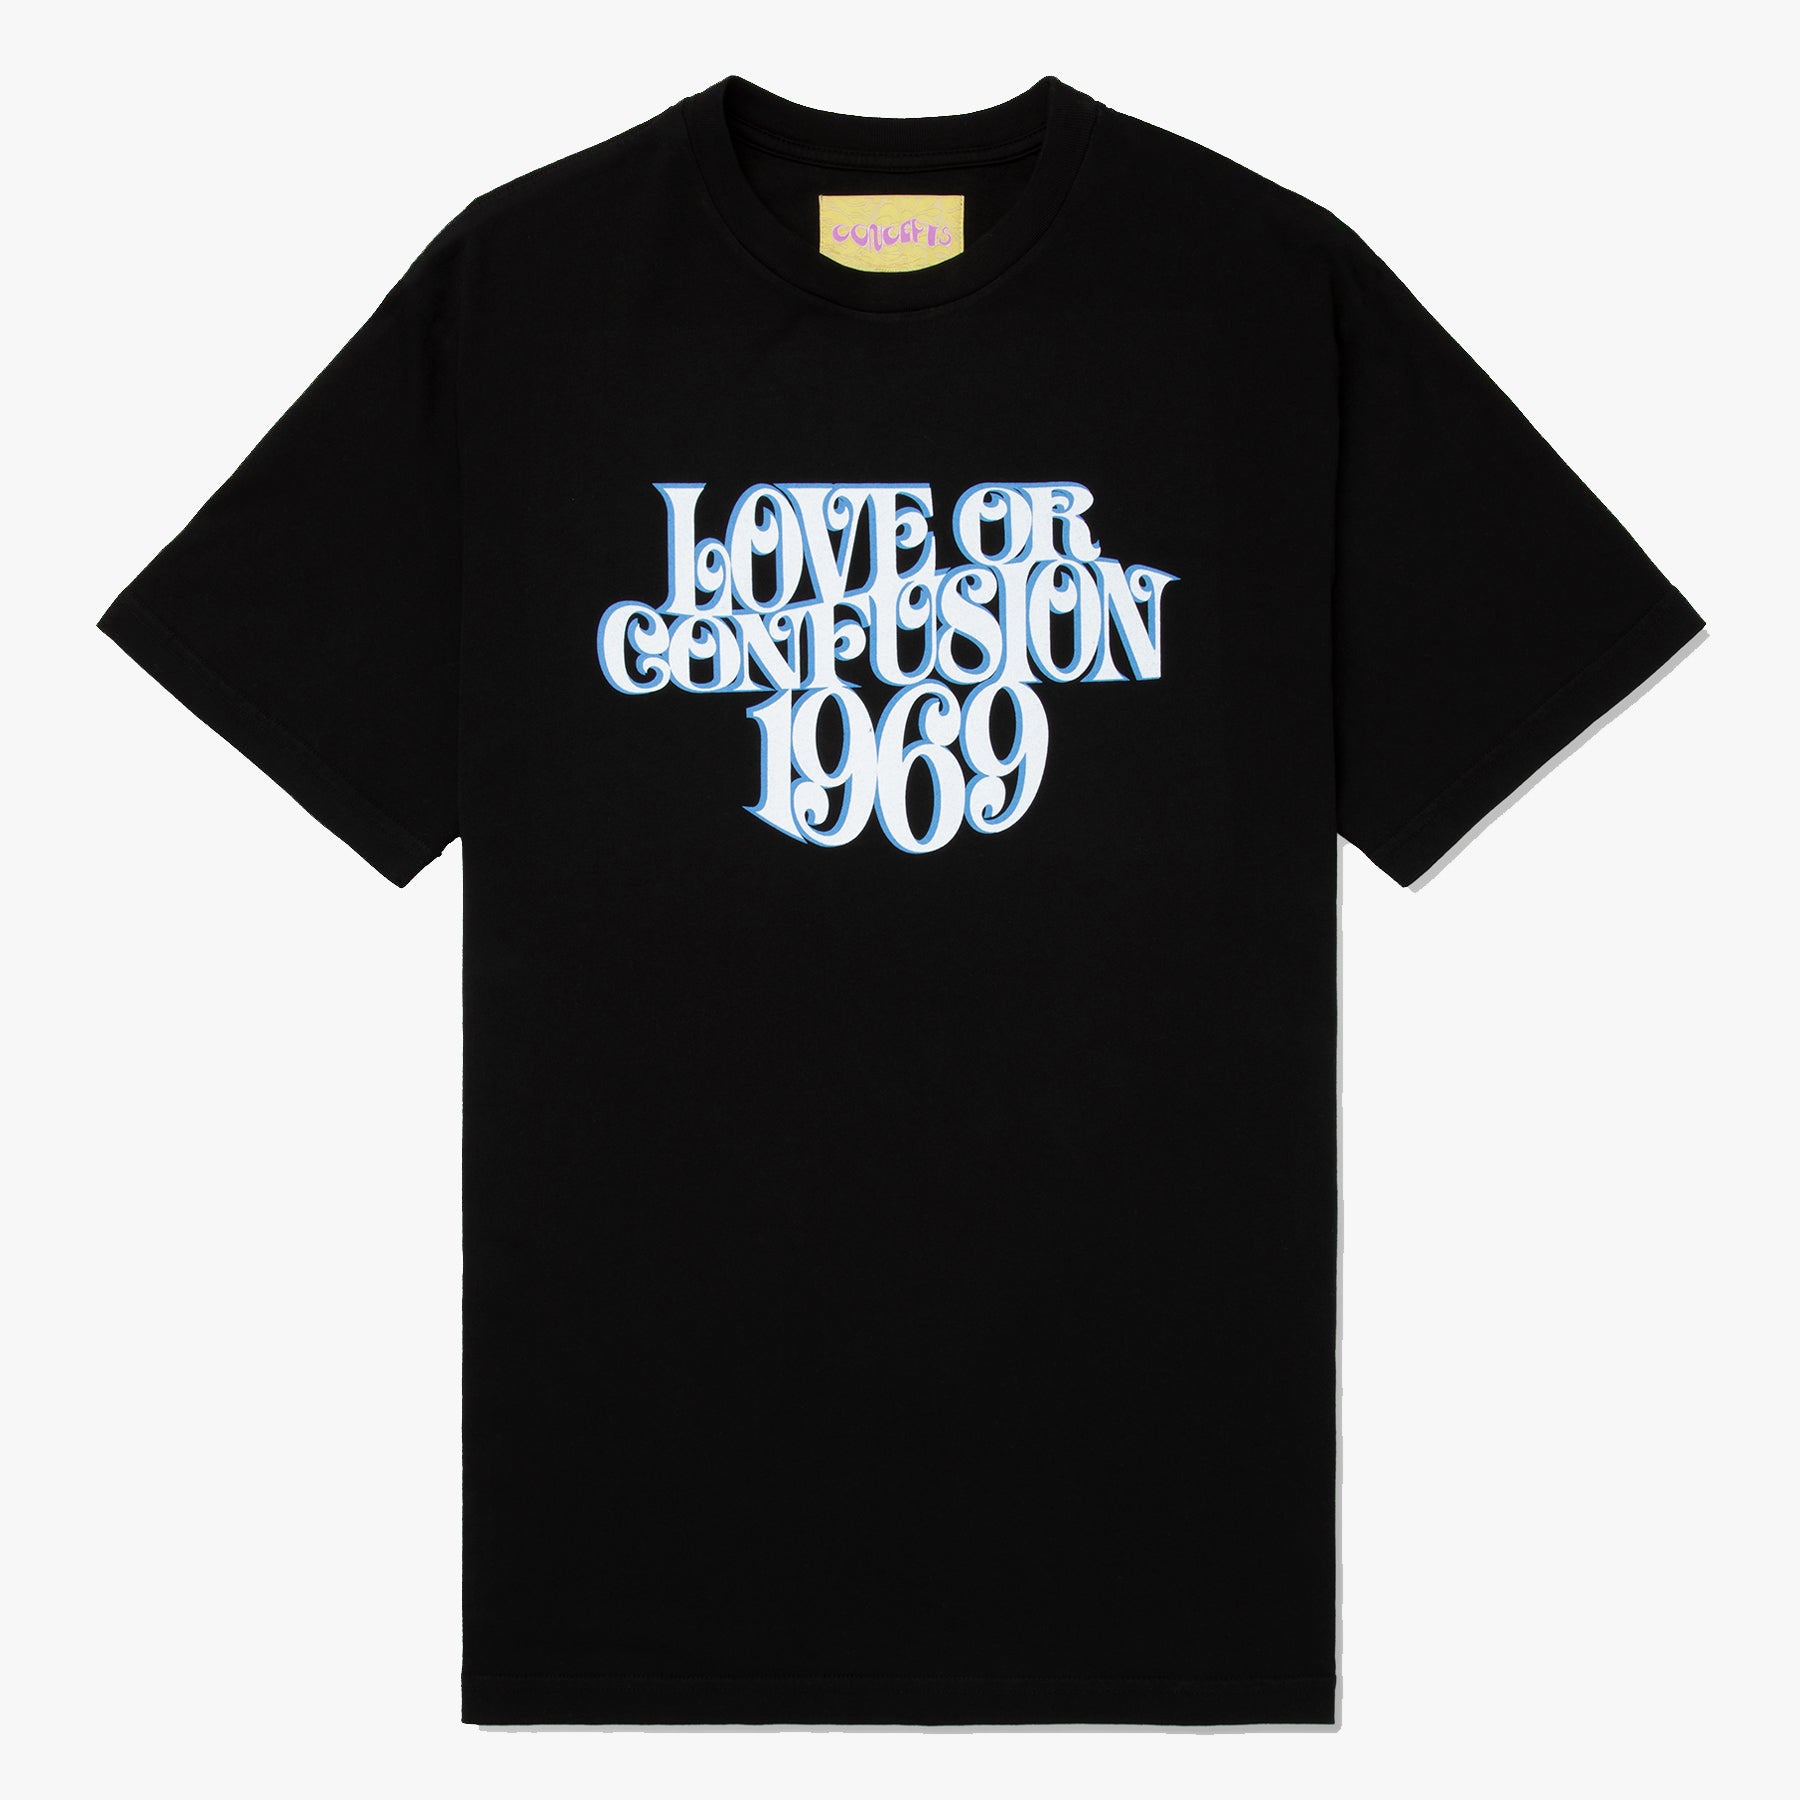 Love or Confusion Tee (Black)